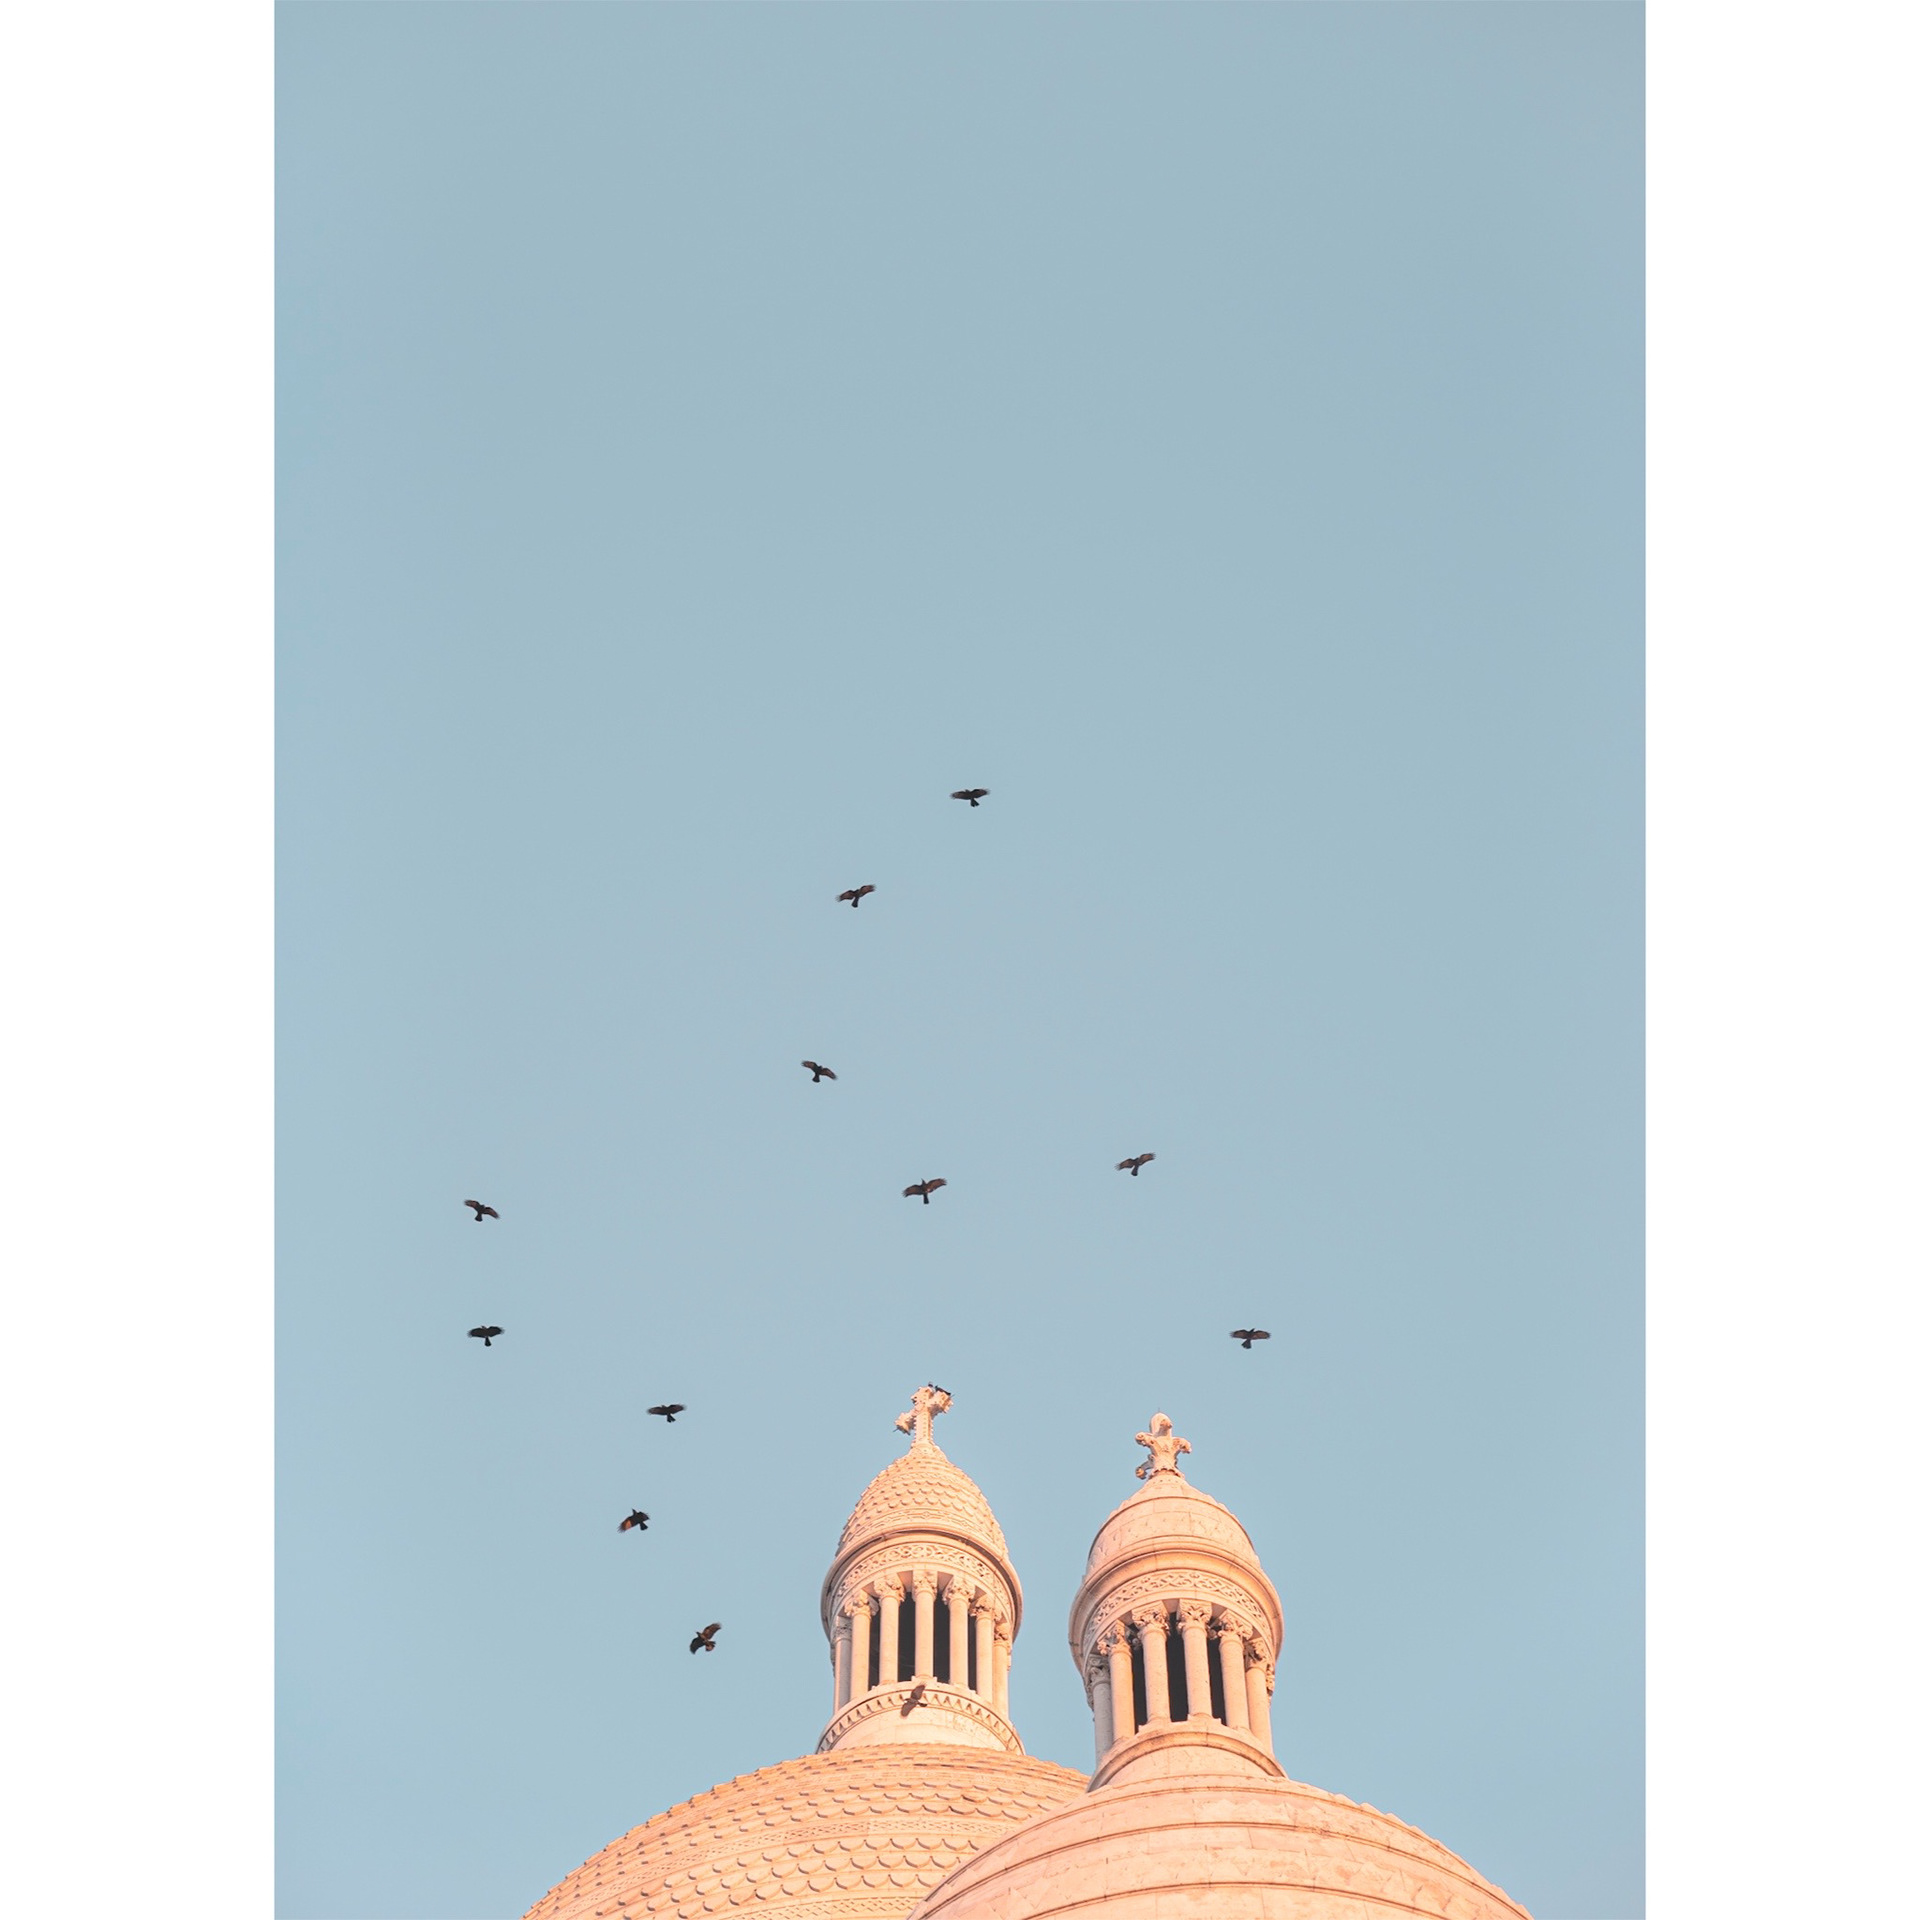 Roof details on top of the Sacré-Cœur Basilica with lines of flying birds. Minimalistic photograph with symmetry and a poetic look. Paris, France 